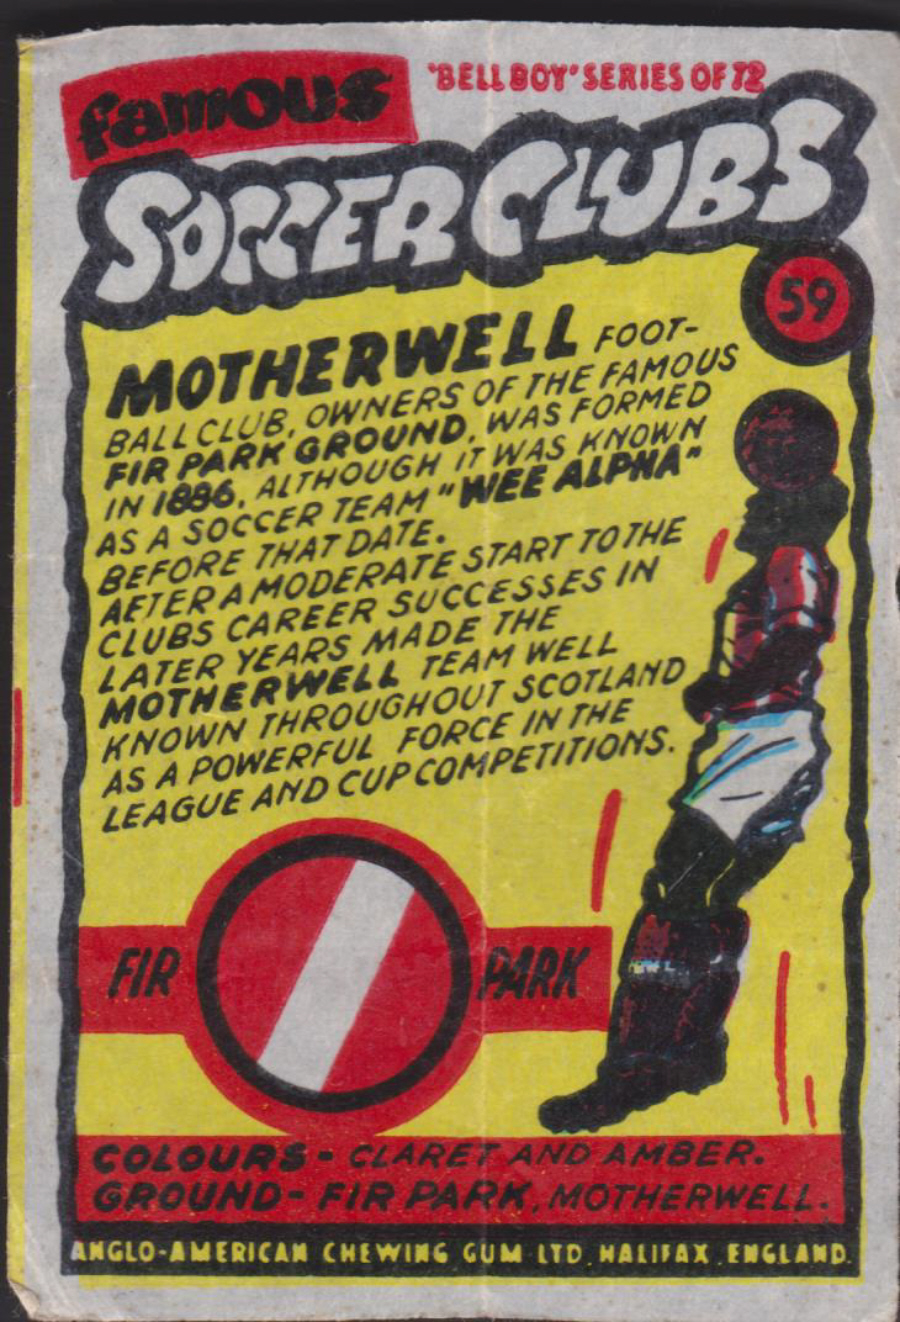 Anglo-American-Chewing-Gum-Wax-Wrapper-Famous-Soccer-Clubs-No-59 -Motherwell